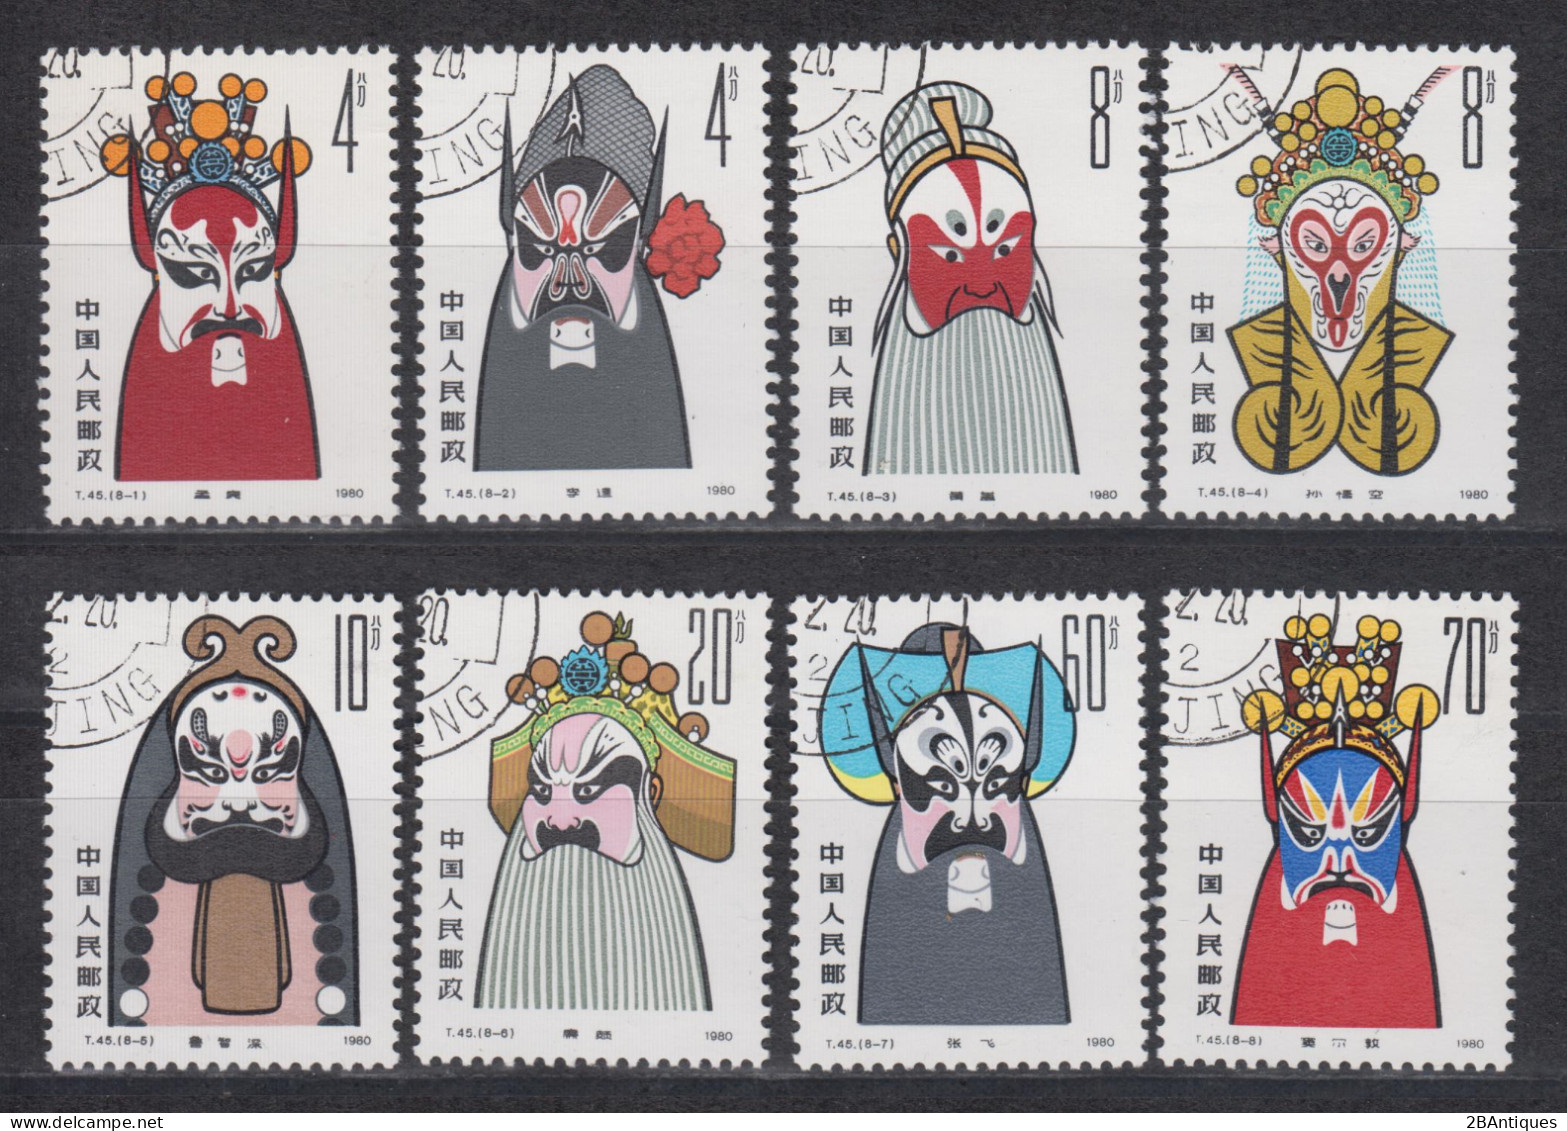 PR CHINA 1980 - Facial Make-up In Beijing Operas CTO OG XF - Used Stamps